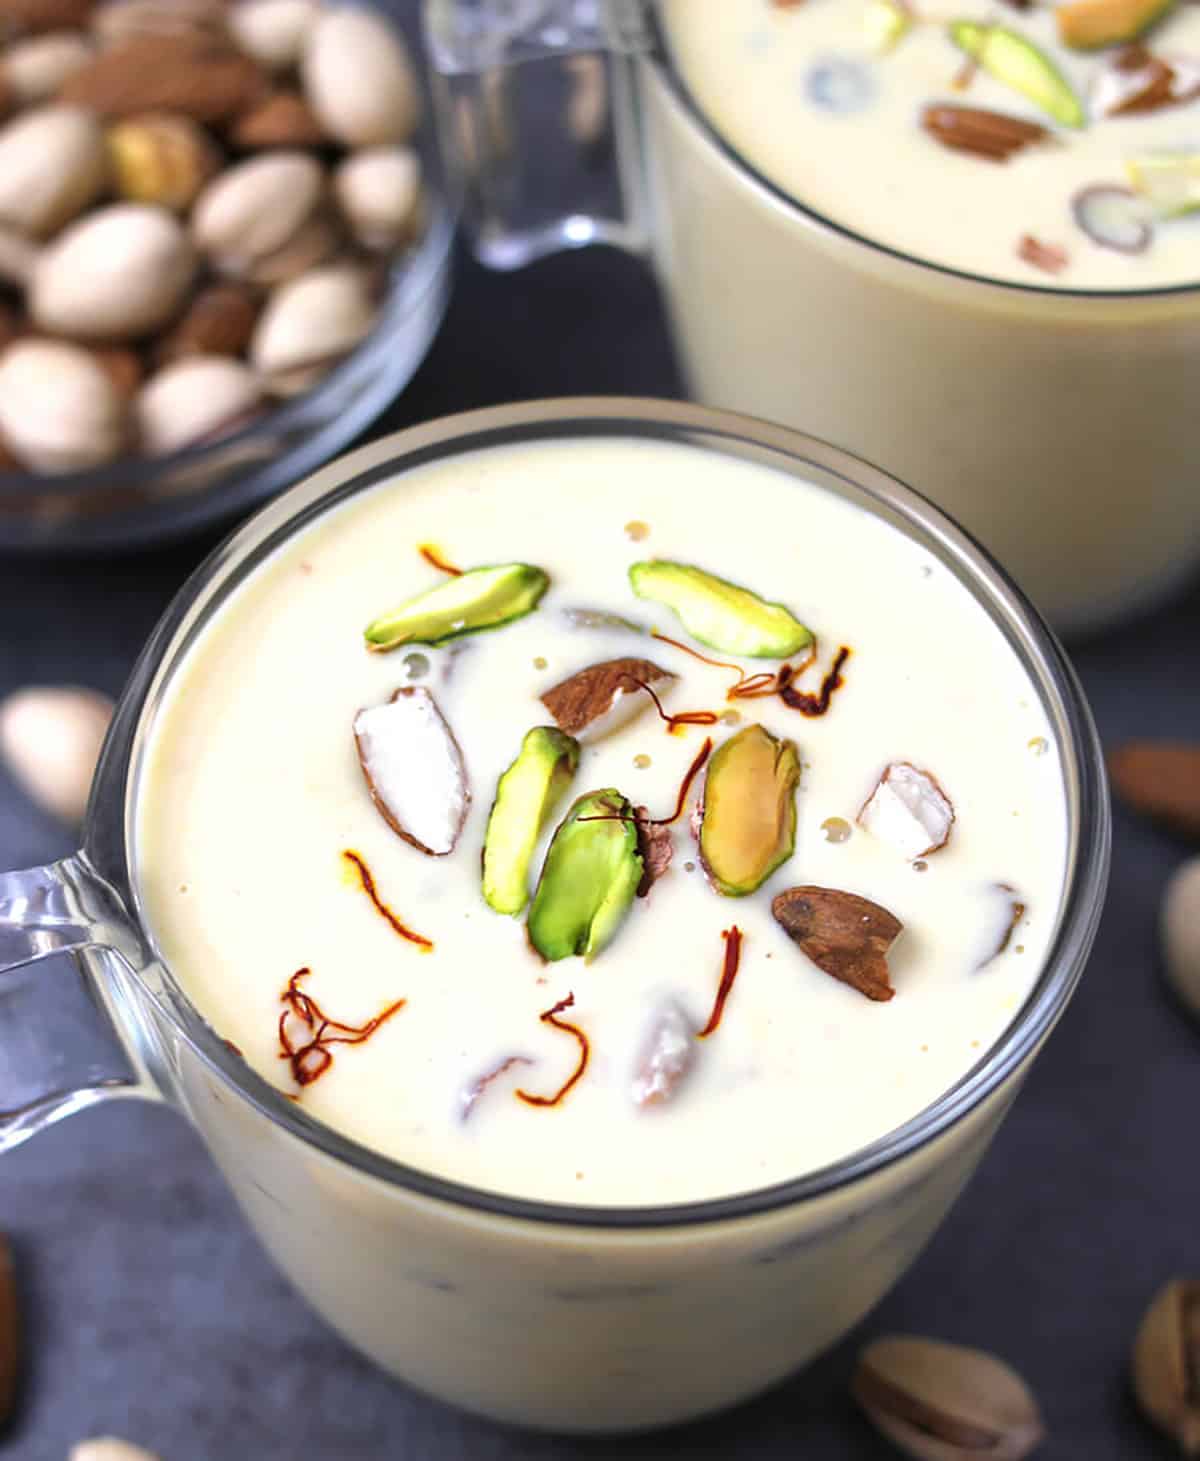 Basundi sweet - Traditional Indian milk dessert served in a glass bowl garnished with nuts. 